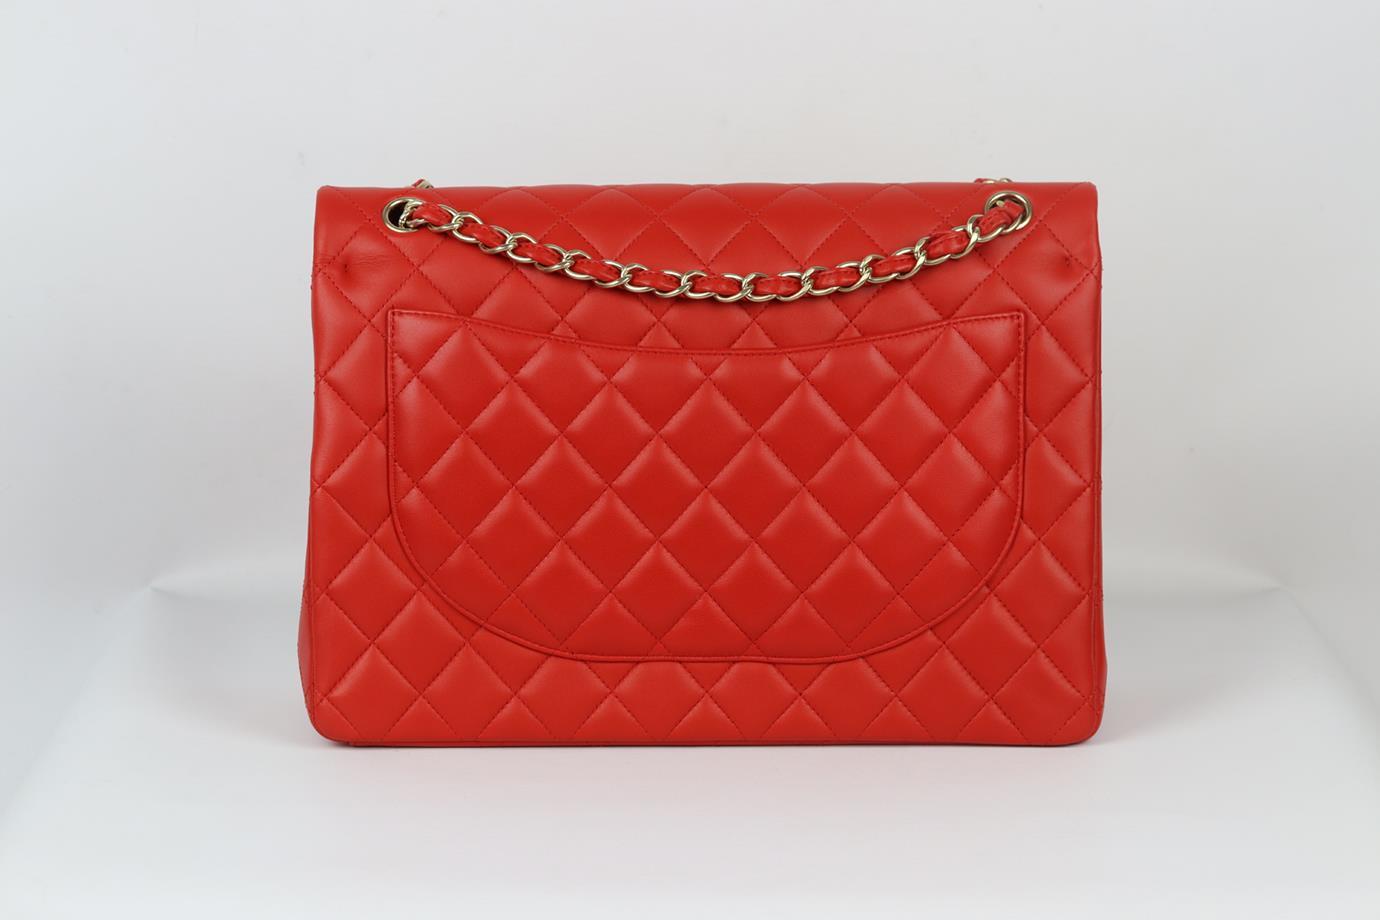 Chanel 2012 Maxi Classic Quilted Leather Double Flap Shoulder Bag In Excellent Condition For Sale In London, GB